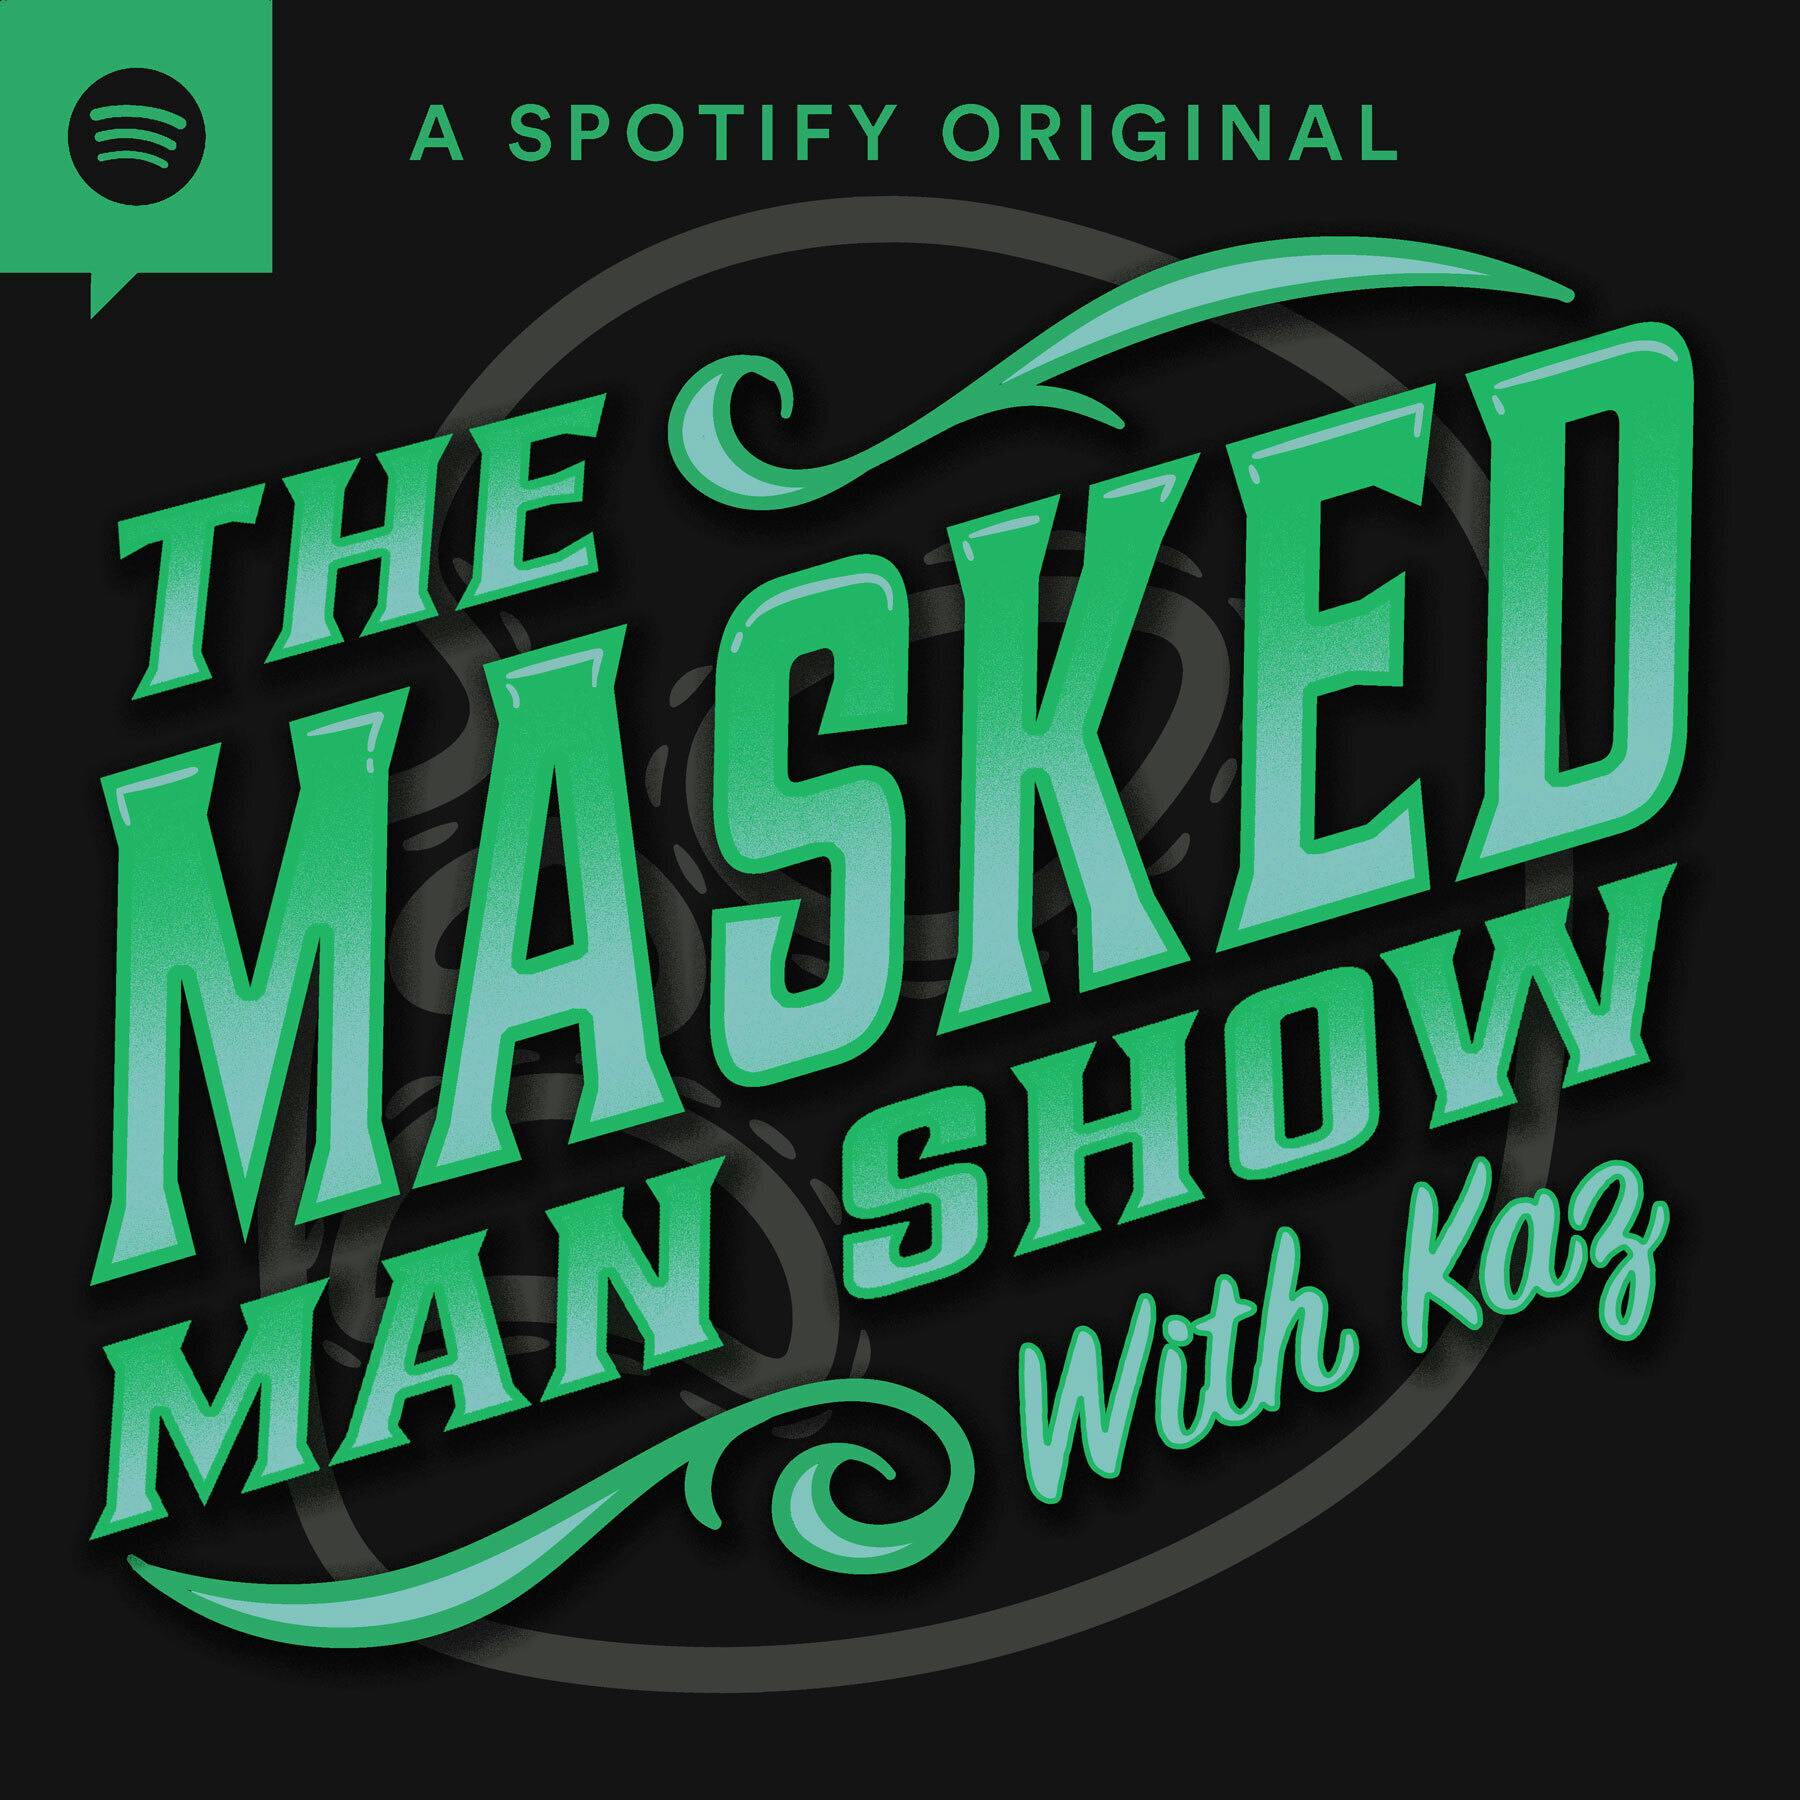 Sneak Attack City! | The Masked Man Show